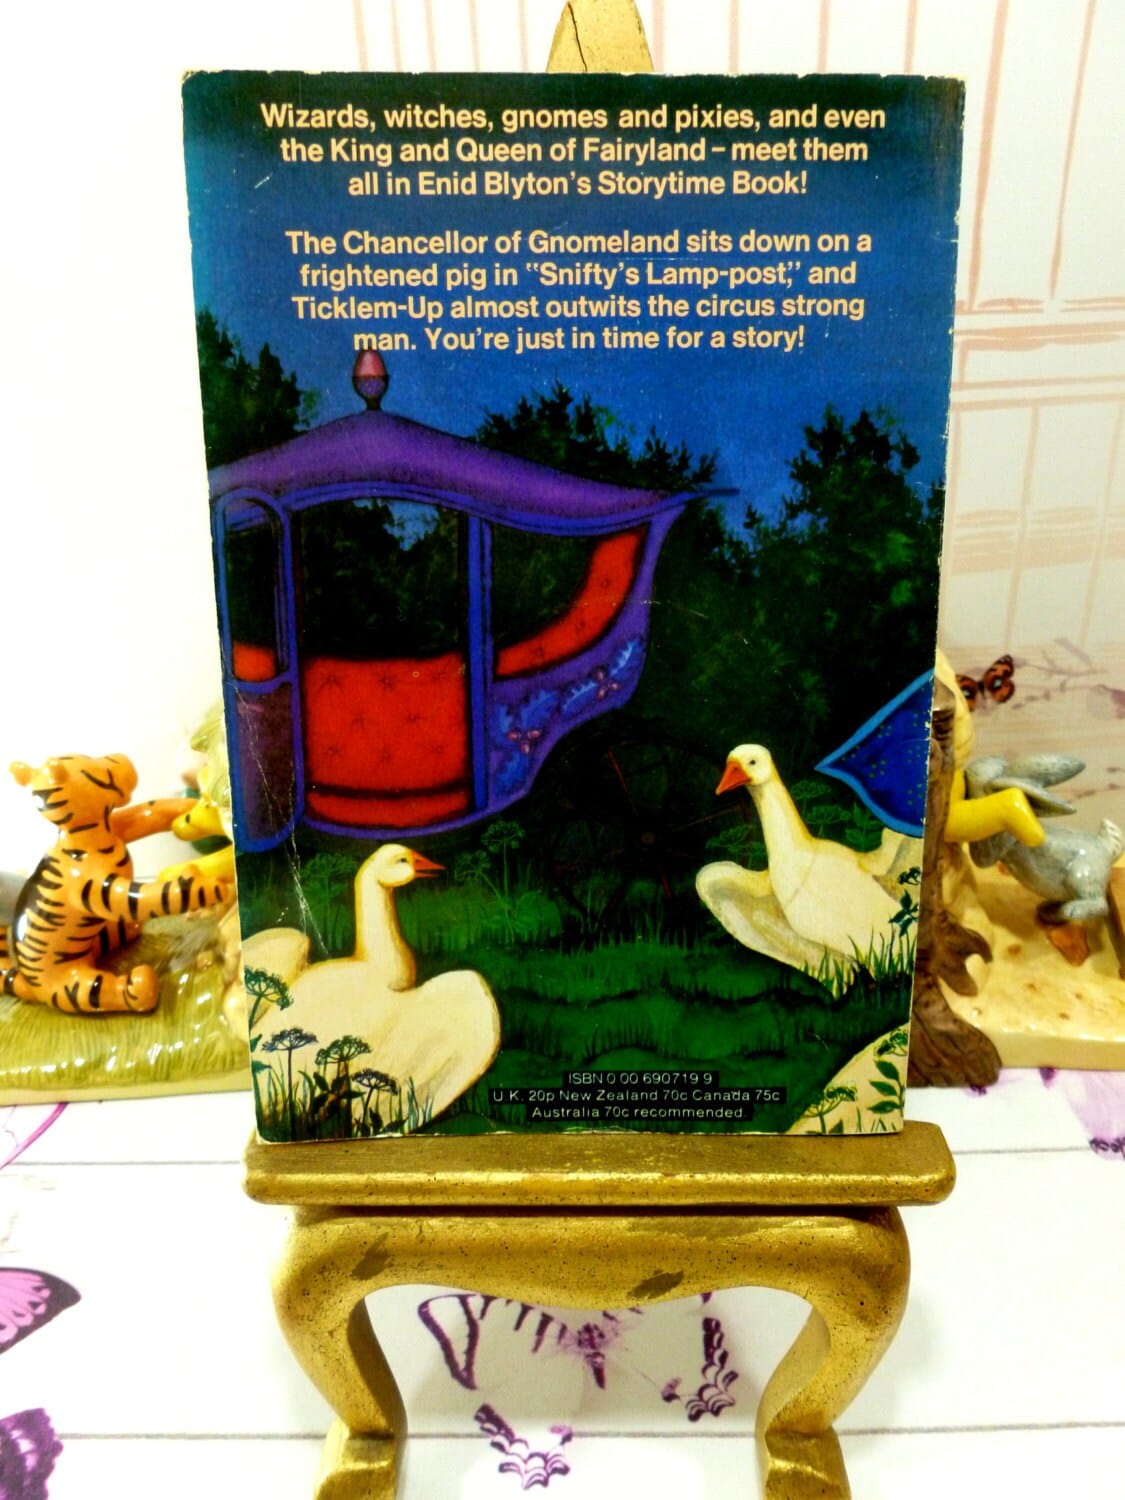 Back cover of Enid Blyton Storytime Book Vintage Paperback Armada 1970s showing white geese looking at a fairytale carriage. 